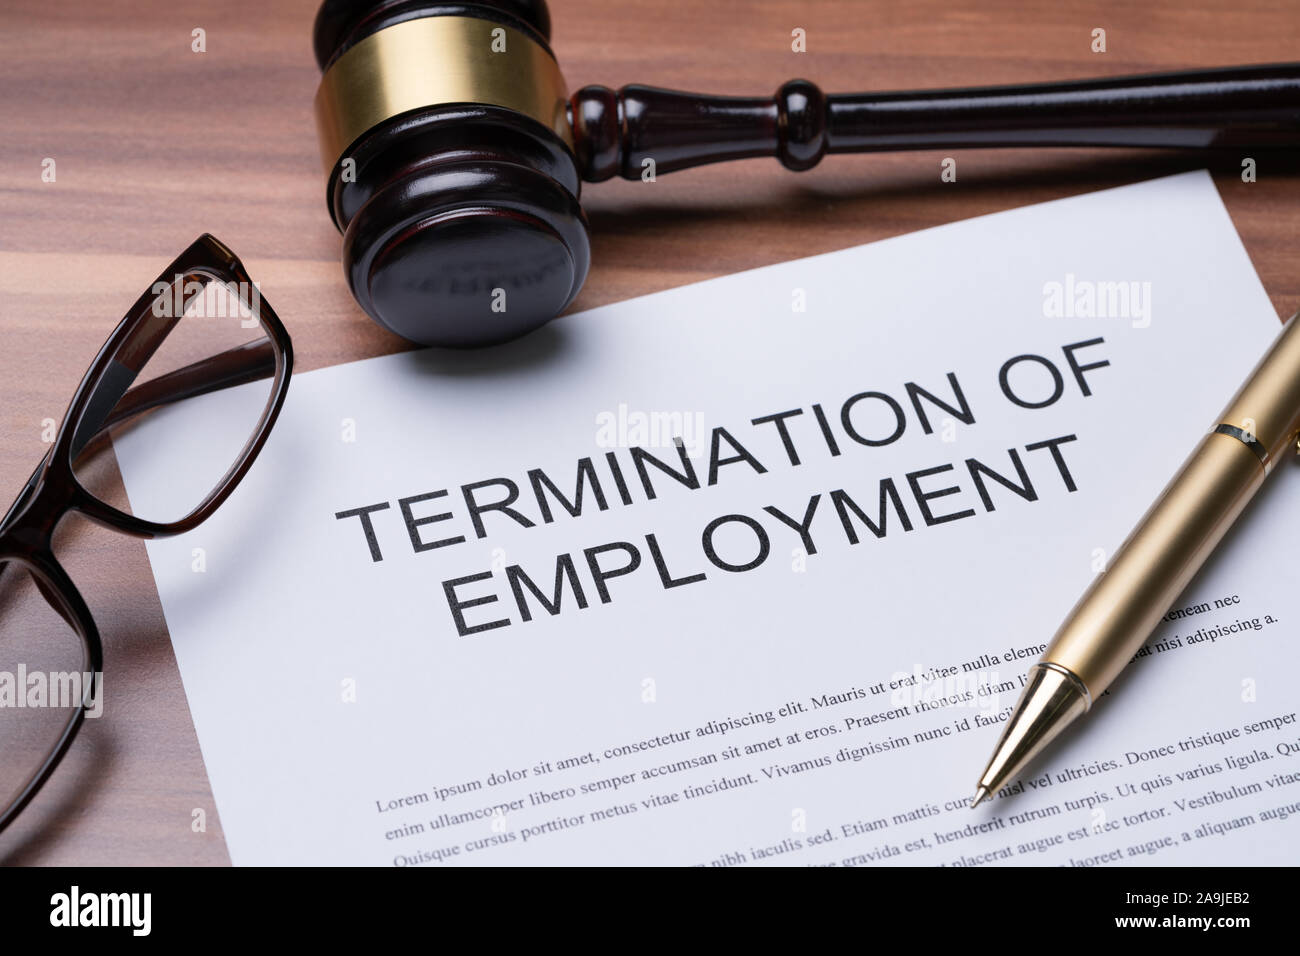 Documents About Termination Of Employment With Pen Stock Photo